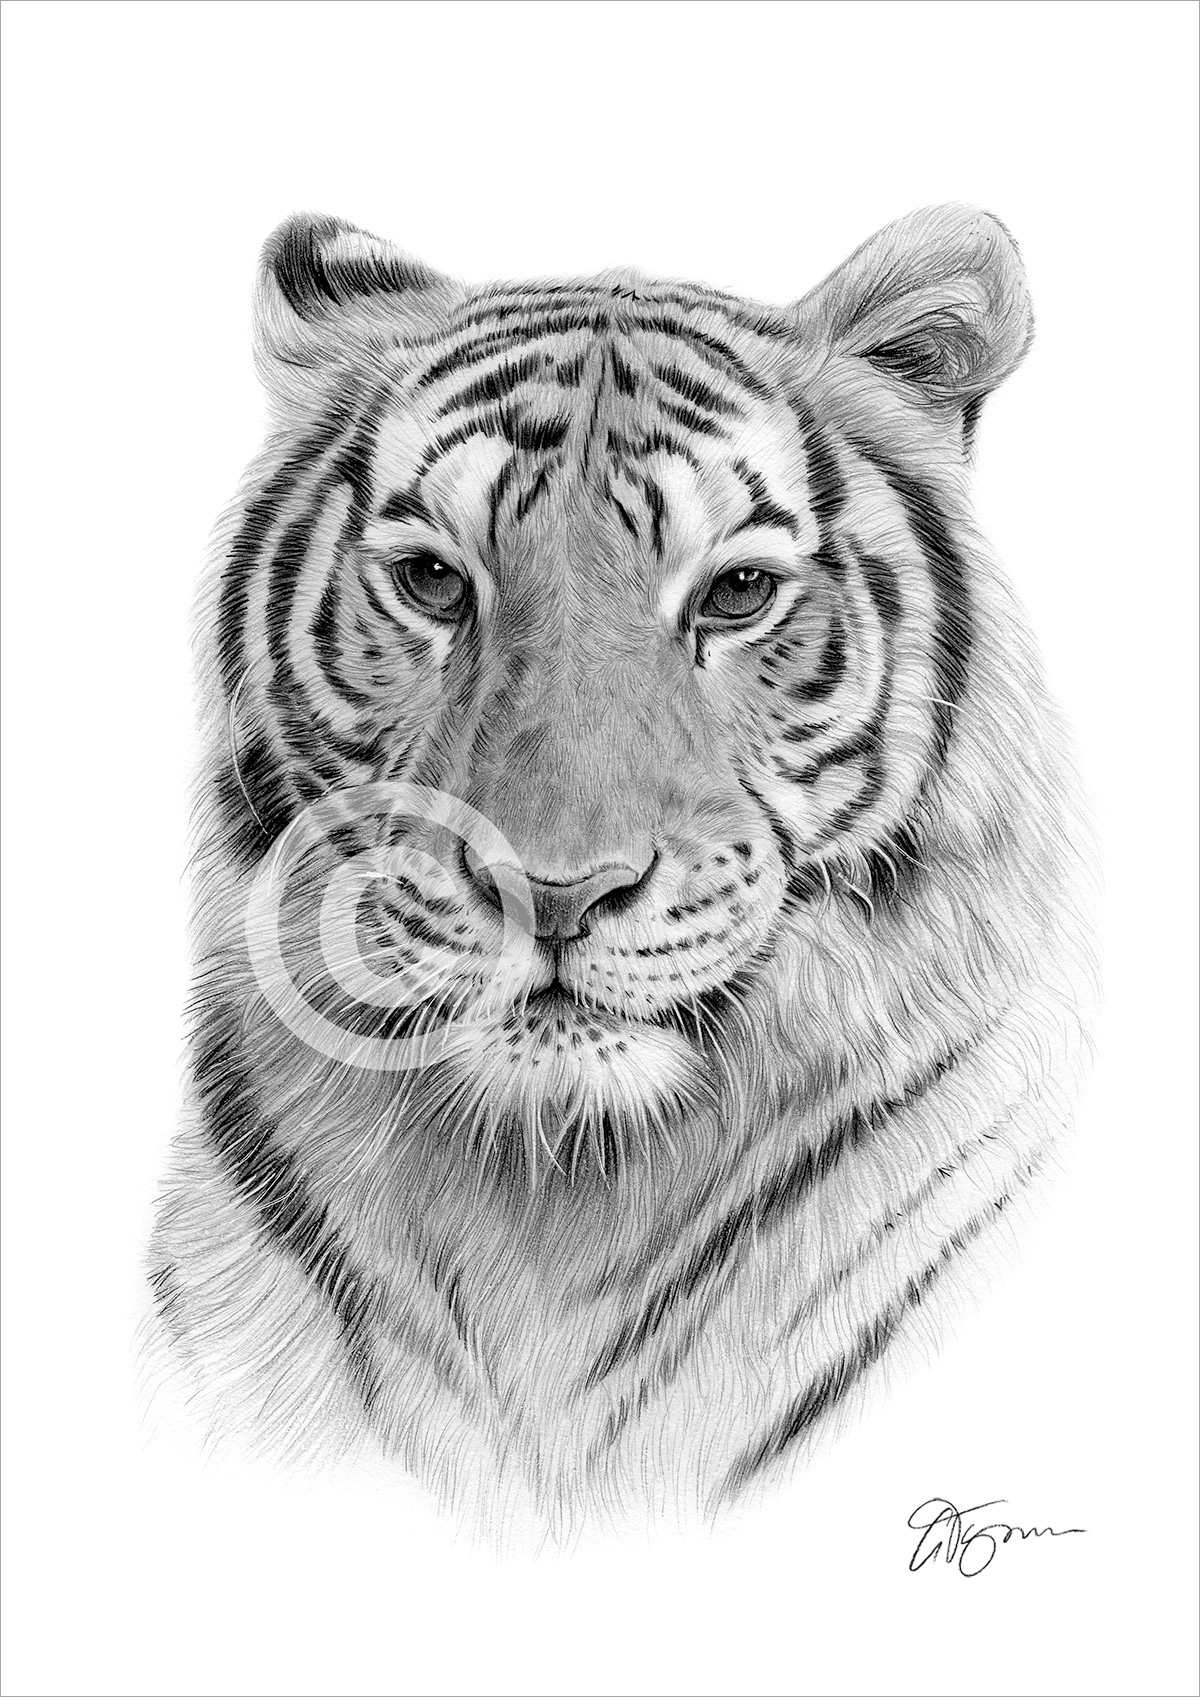 Pencil drawing of a Bengal tiger by artist Gary Tymon